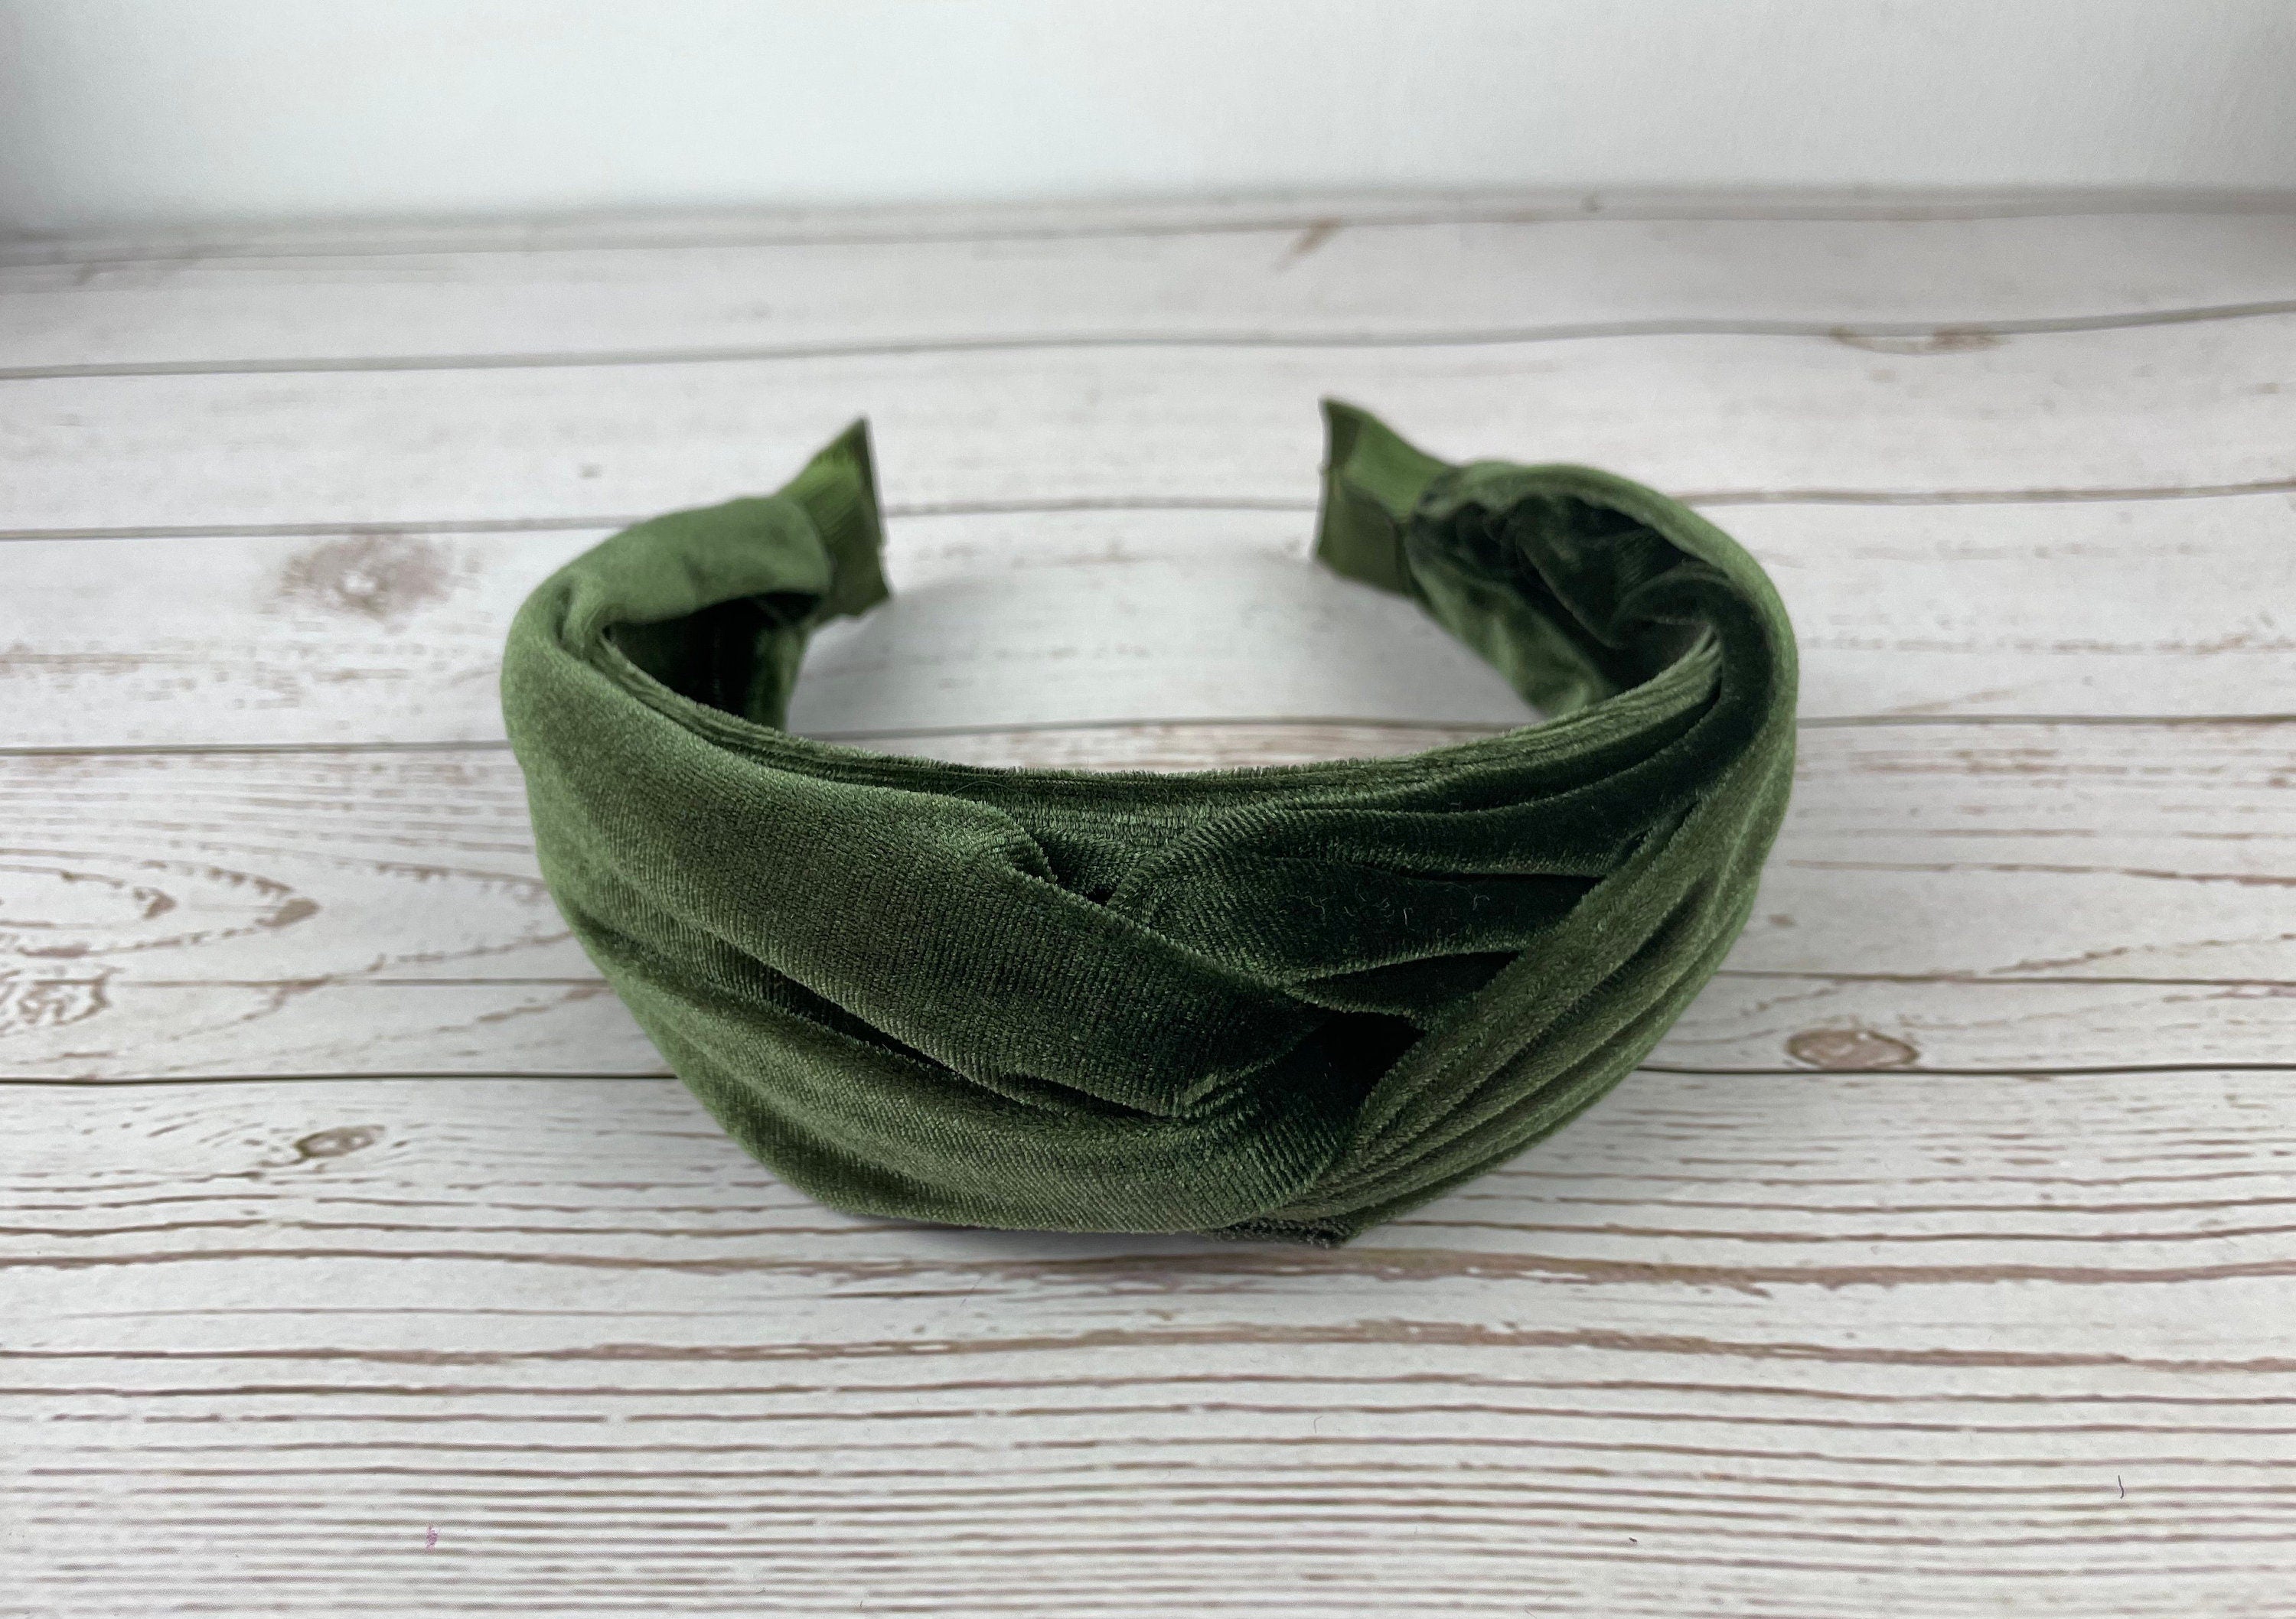 If you&#39;re looking for a chic and versatile accessory, this braided velvet headband is the perfect choice. The army green color is both trendy and timeless, and the braided design adds a touch of bohemian flair.